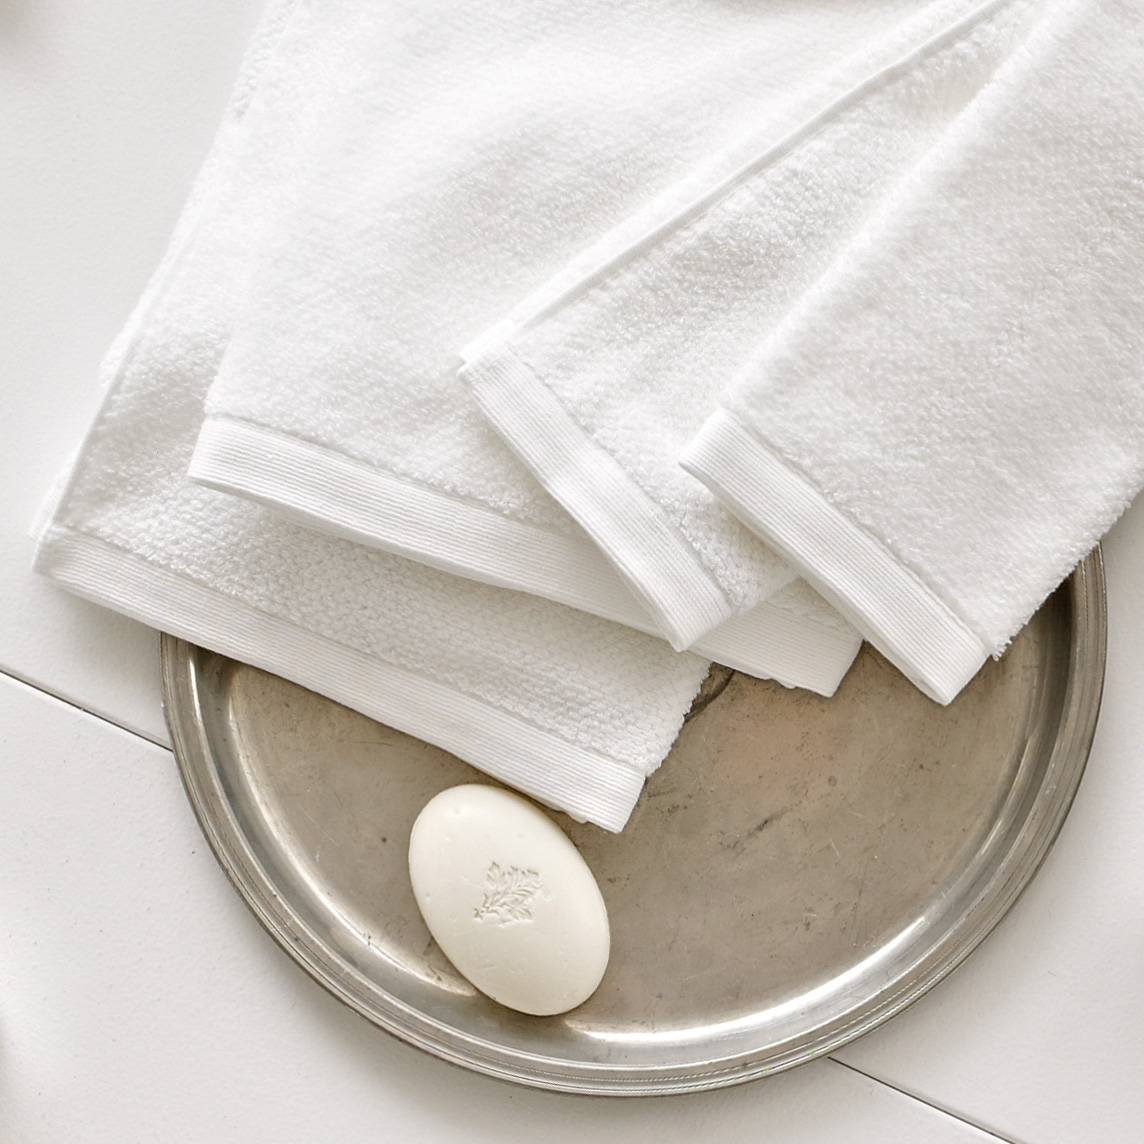 Luxury Towels Buying Guide: 7 Tips to Help You Out When Buying Them